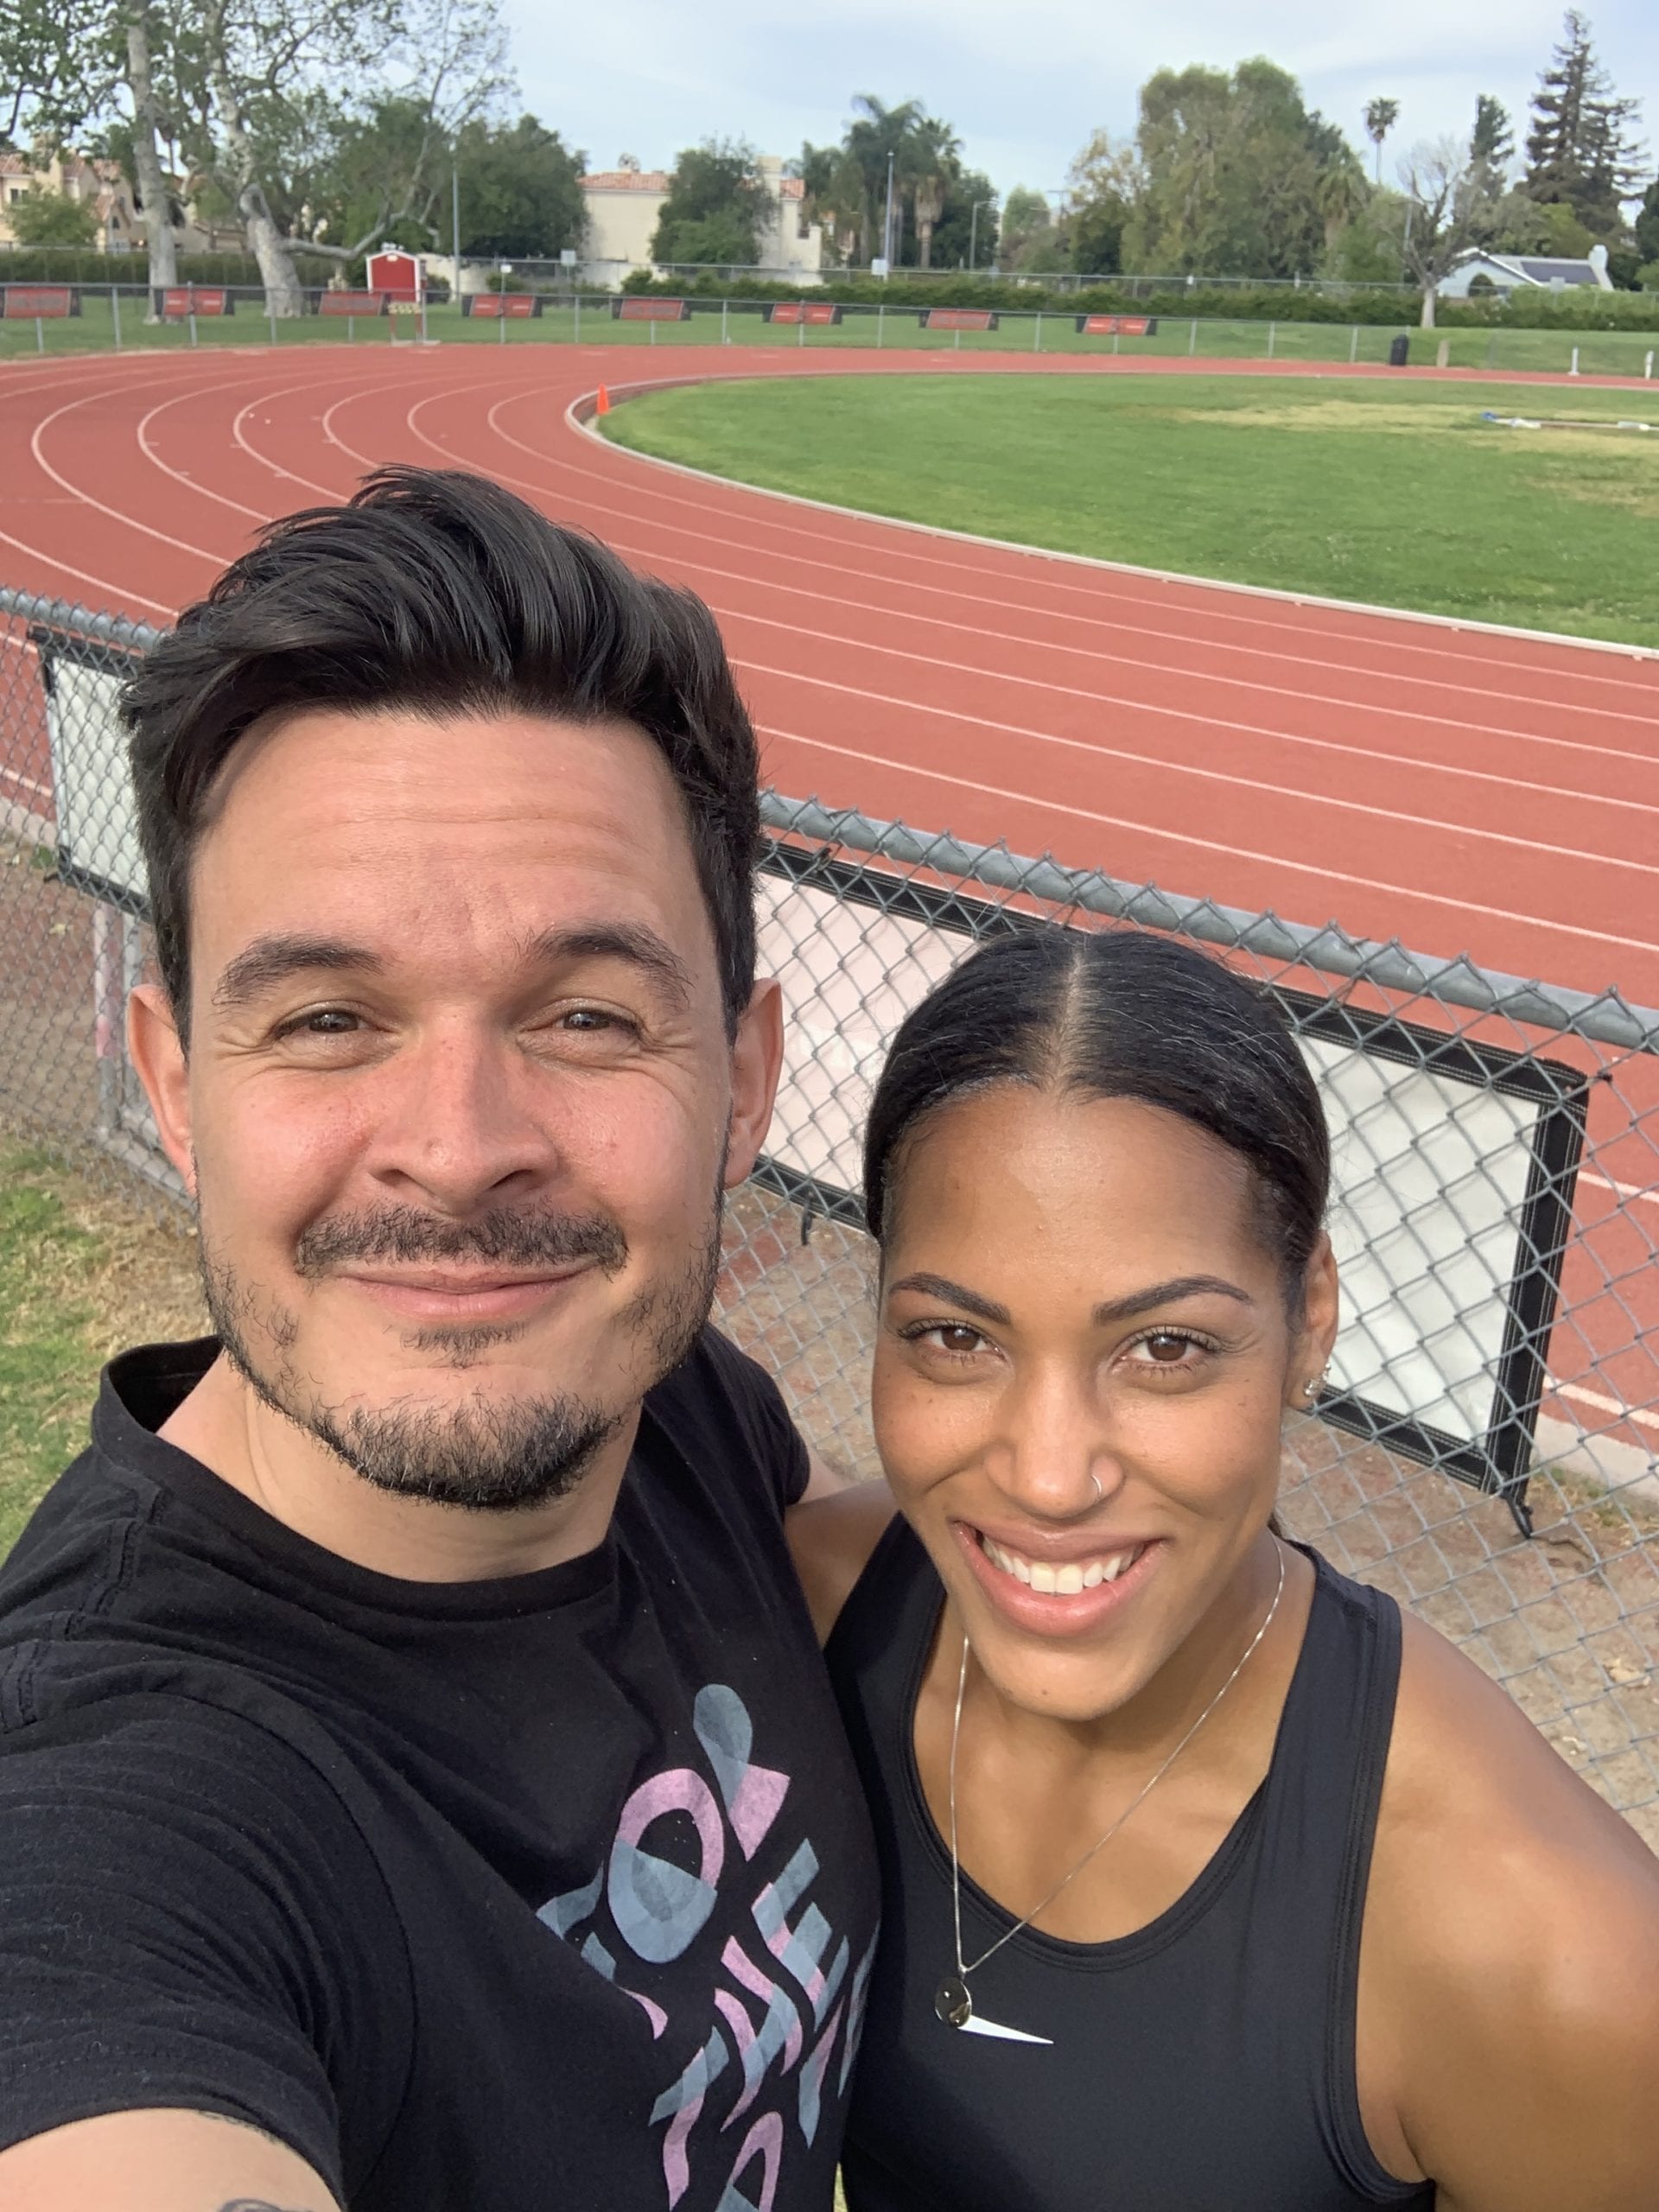 Karelle Edwards Canadian Olympic Athlete smiling and posing with a man in front of the track